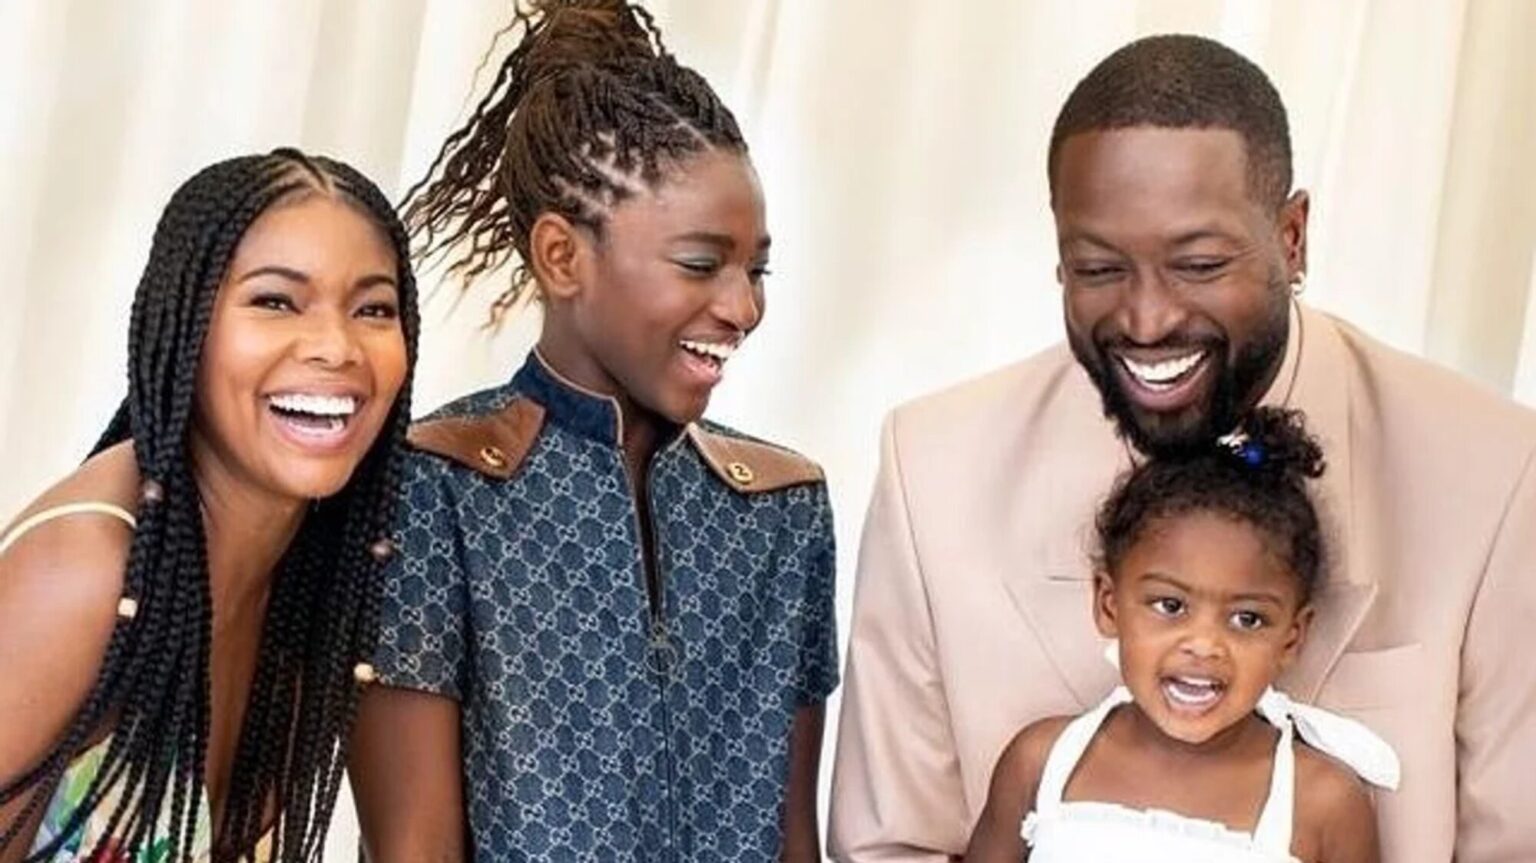 We're absolutely obsessed with posts of Gabrielle Union and her kids. Want to see all their special moments? Warm up your heart with these cute posts here.